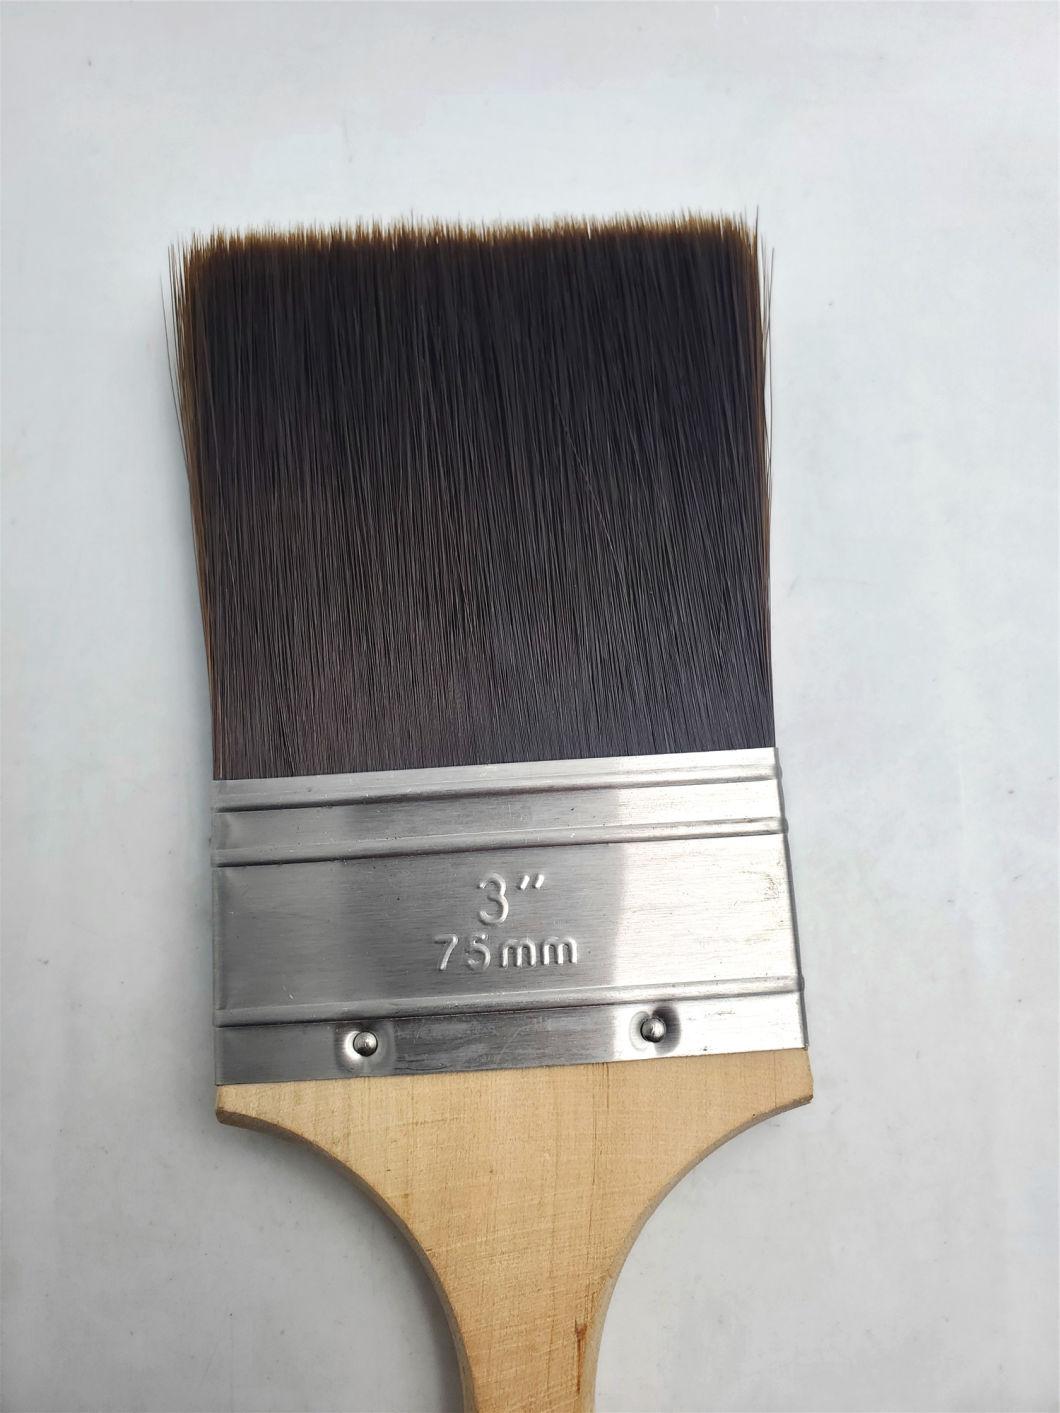 High Quality Professional Wooden Handle Paint Brush